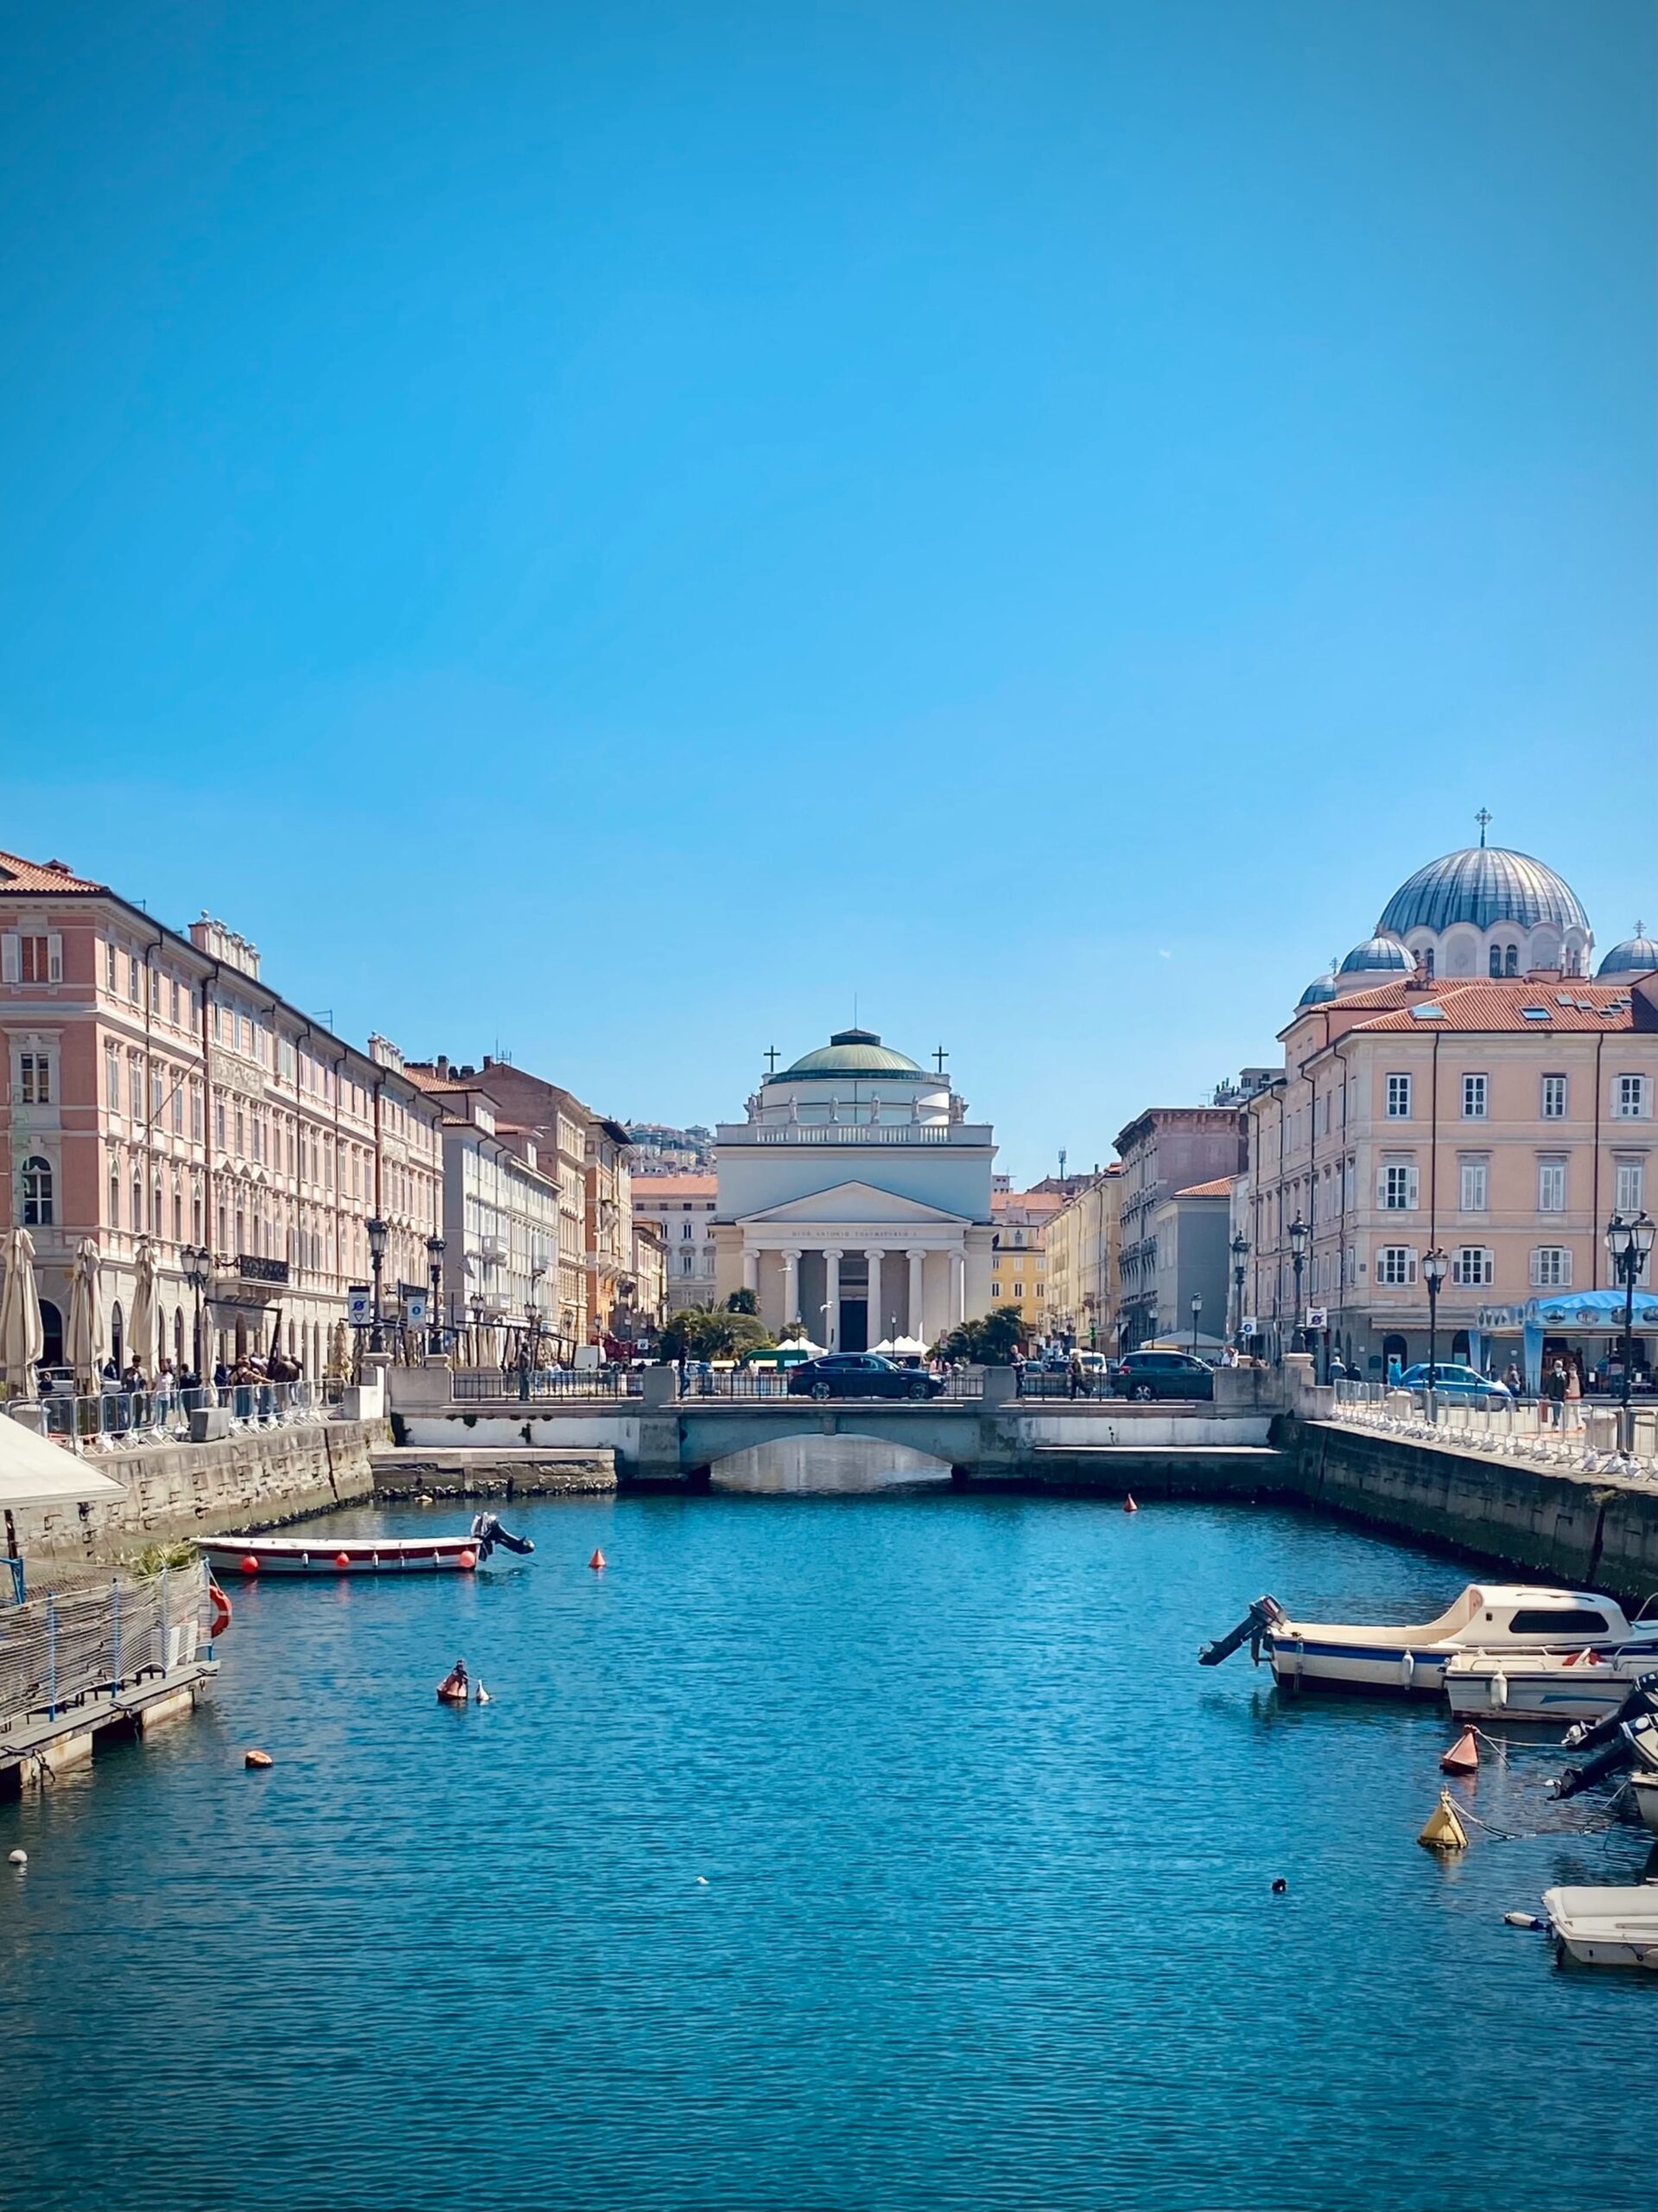 trieste cruise port canal italy